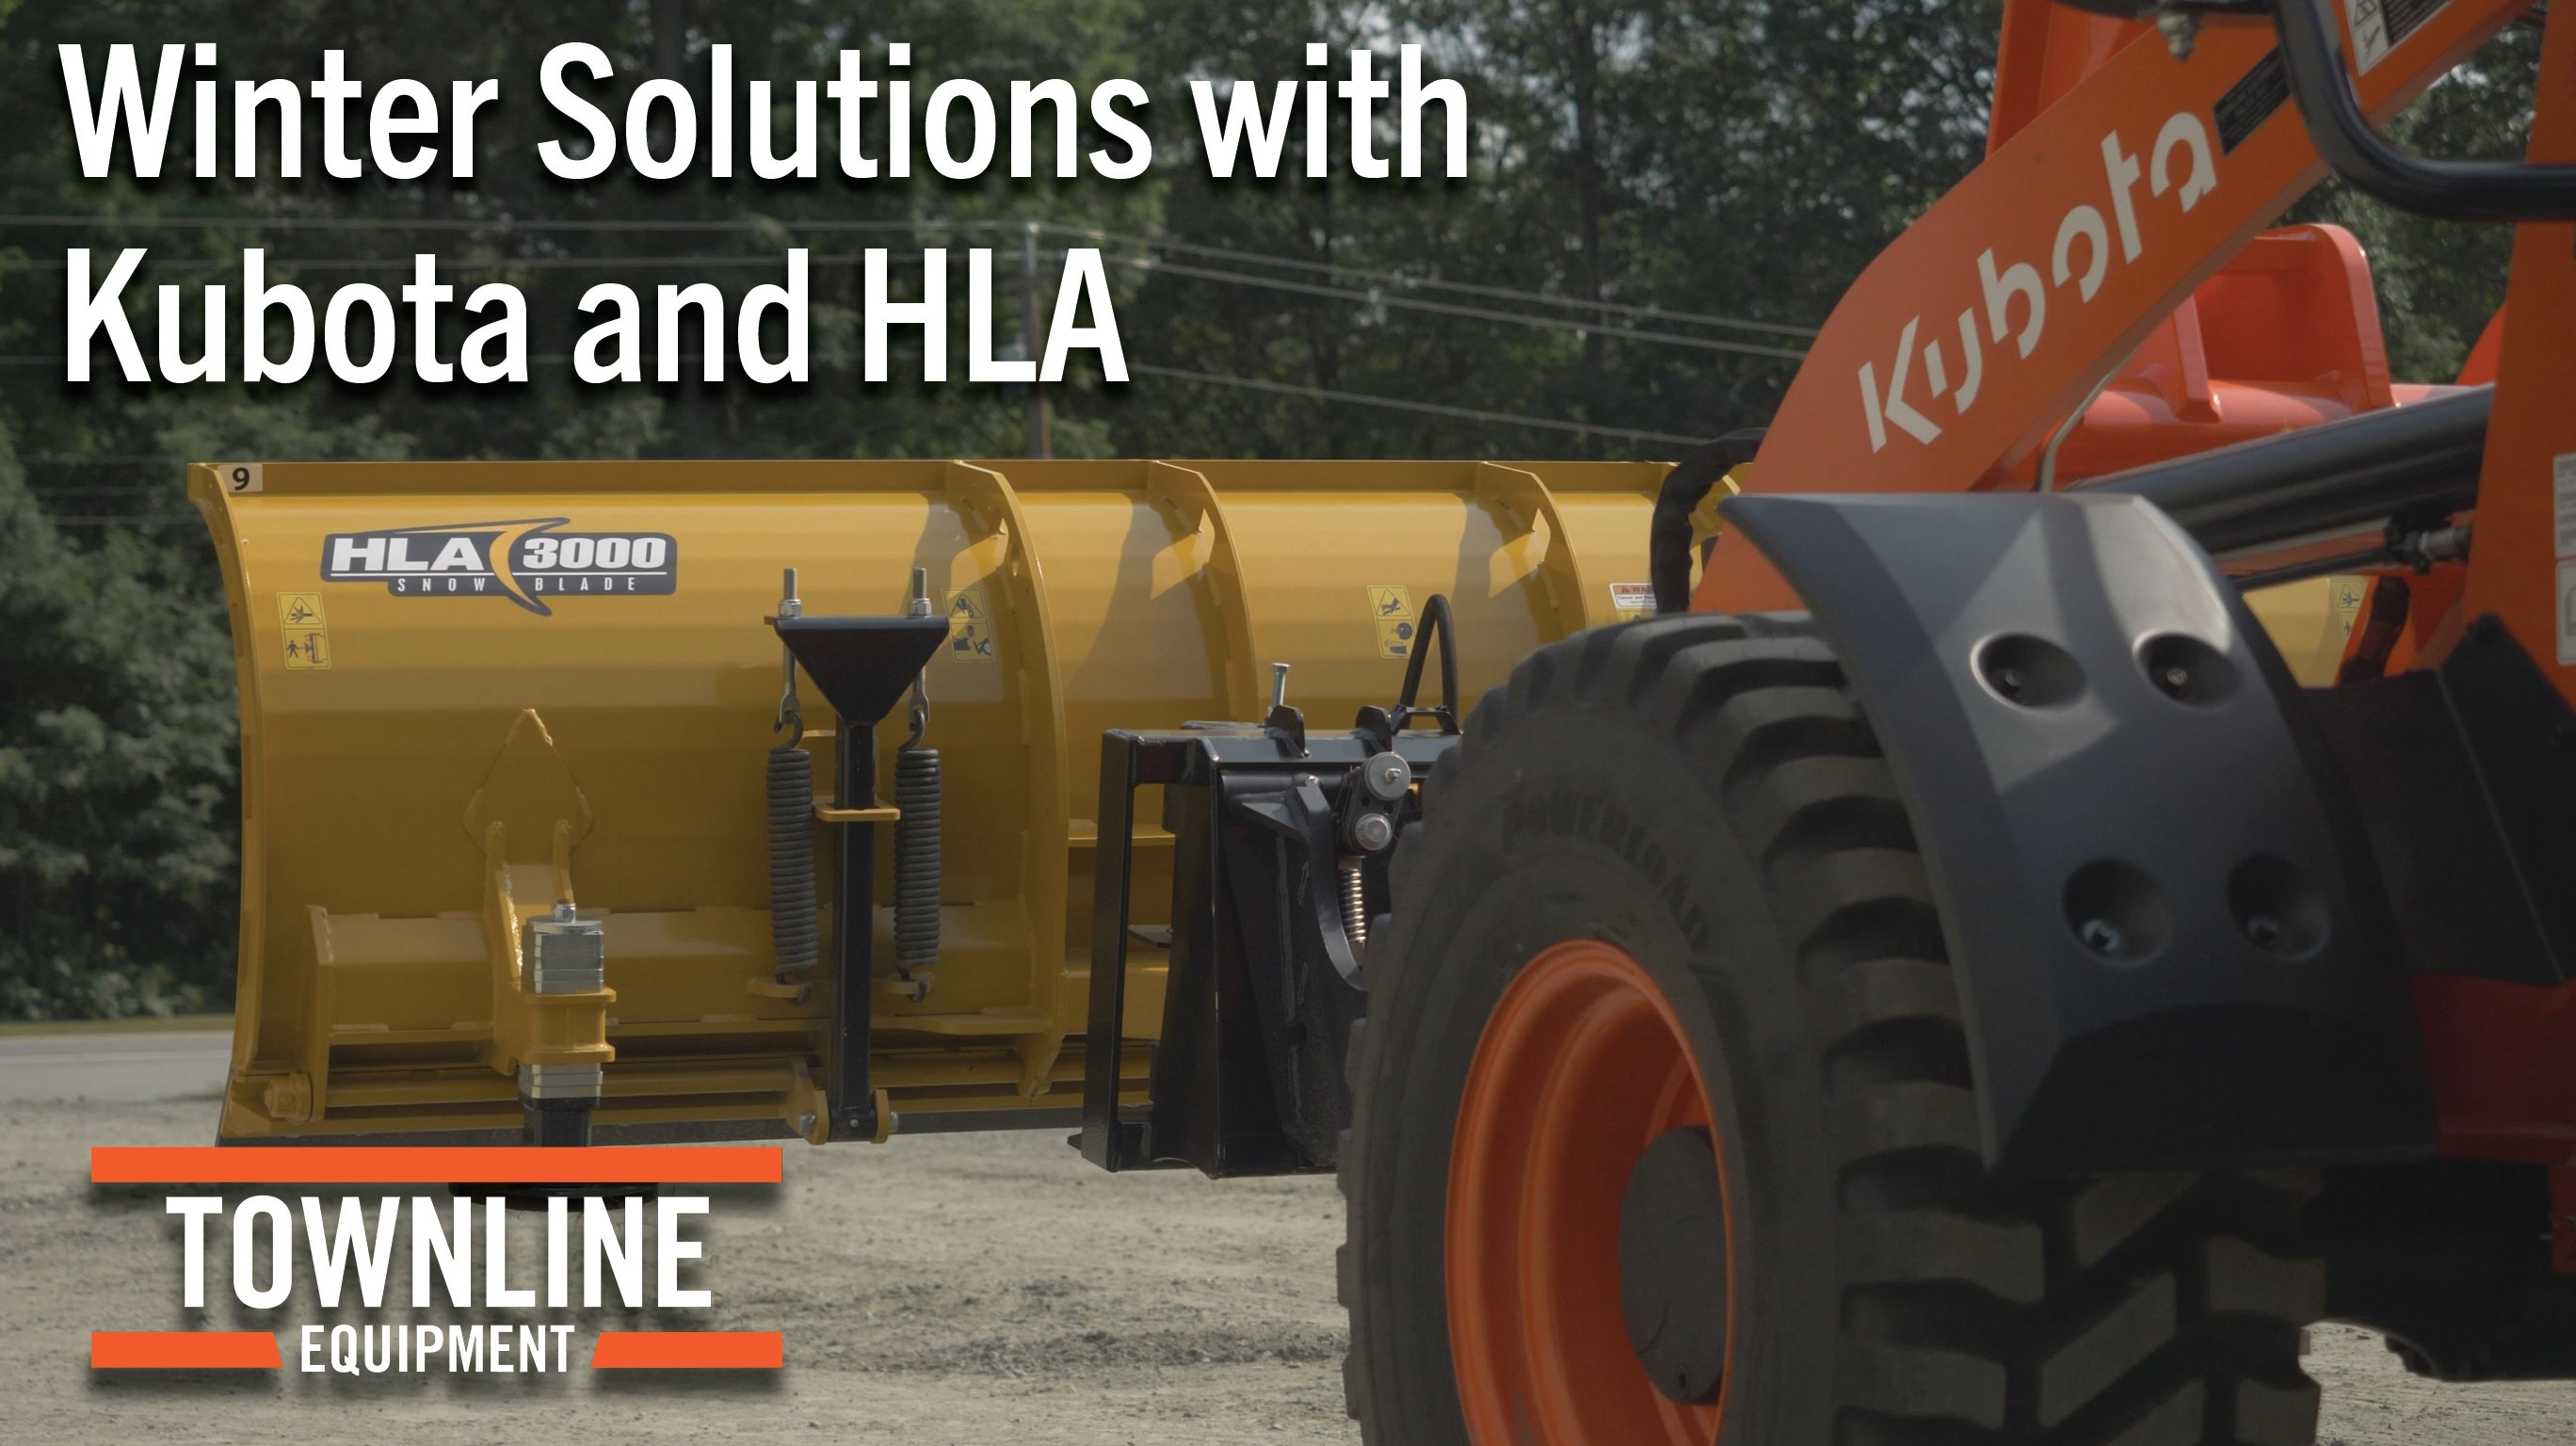 Winter Solutions with Kubota and HLA